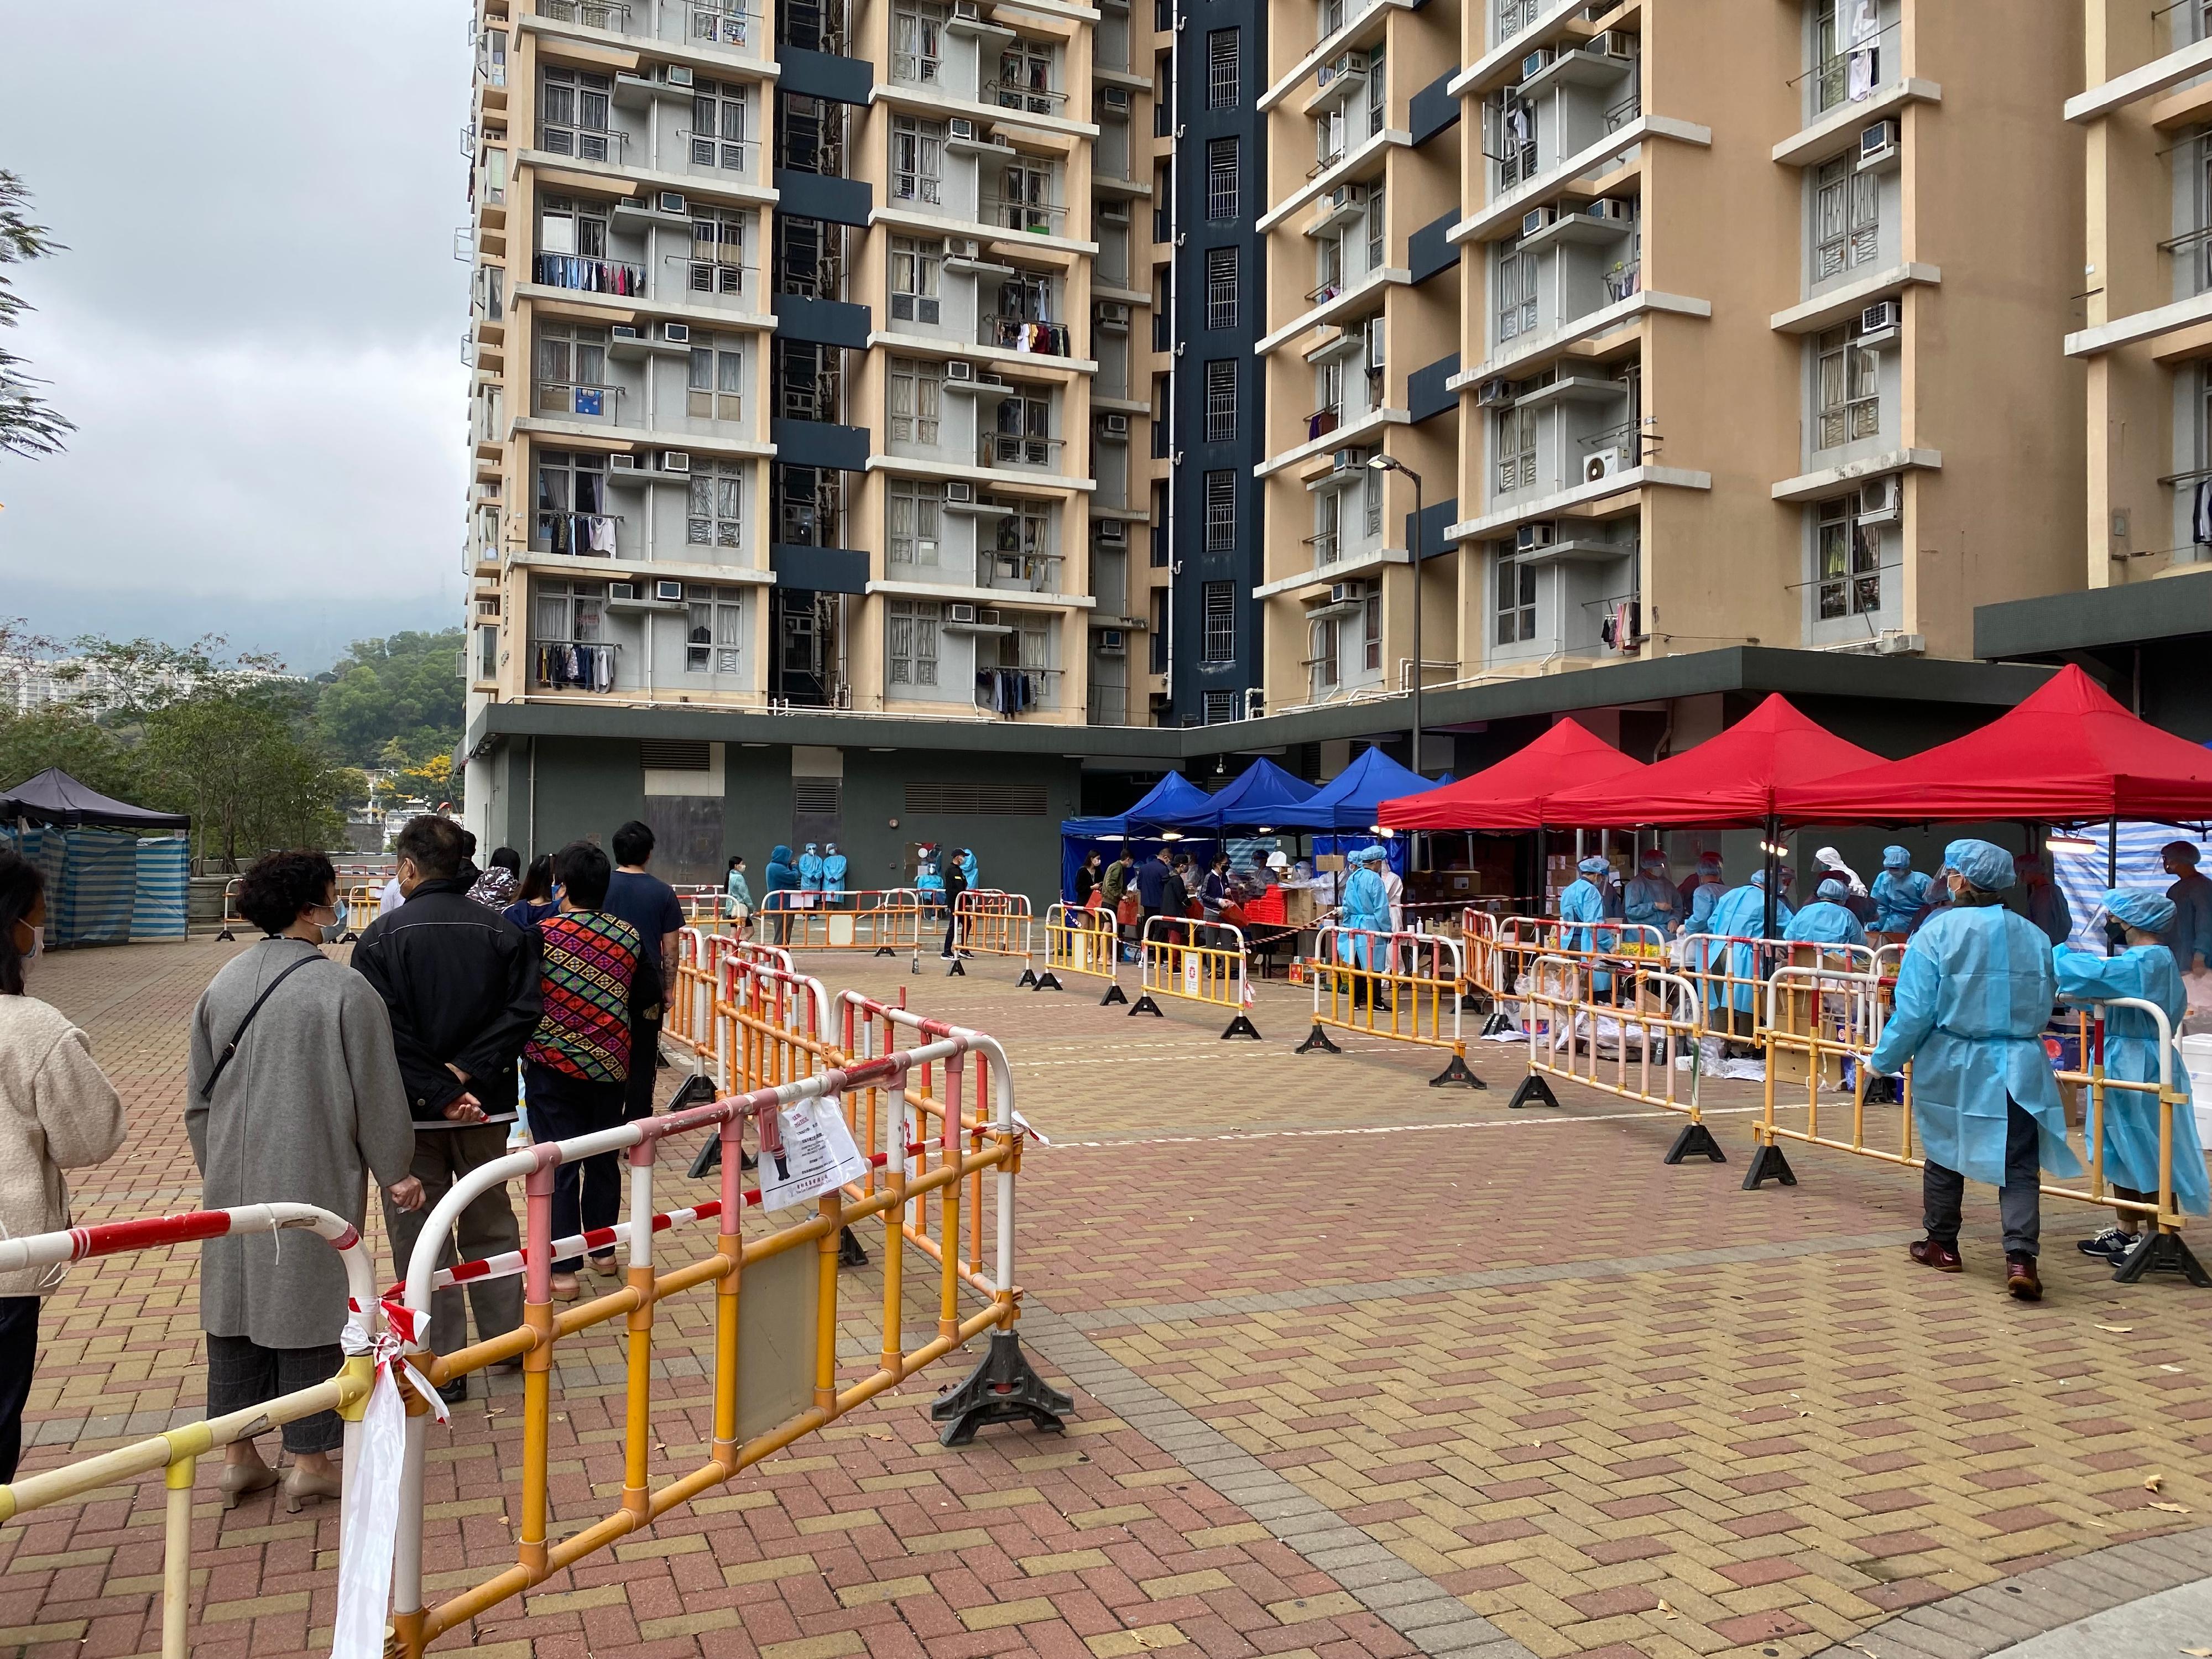 The Government on January 21 made a "restriction-testing declaration" and issued a compulsory testing notice in respect of the specified "restricted area" in Kwai Chung (i.e. Ying Kwai House, Kwai Chung Estate), under which people within the specified "restricted area" in Kwai Chung were required to stay in their premises and undergo compulsory testing. Photo shows the affected persons being arranged for testing.